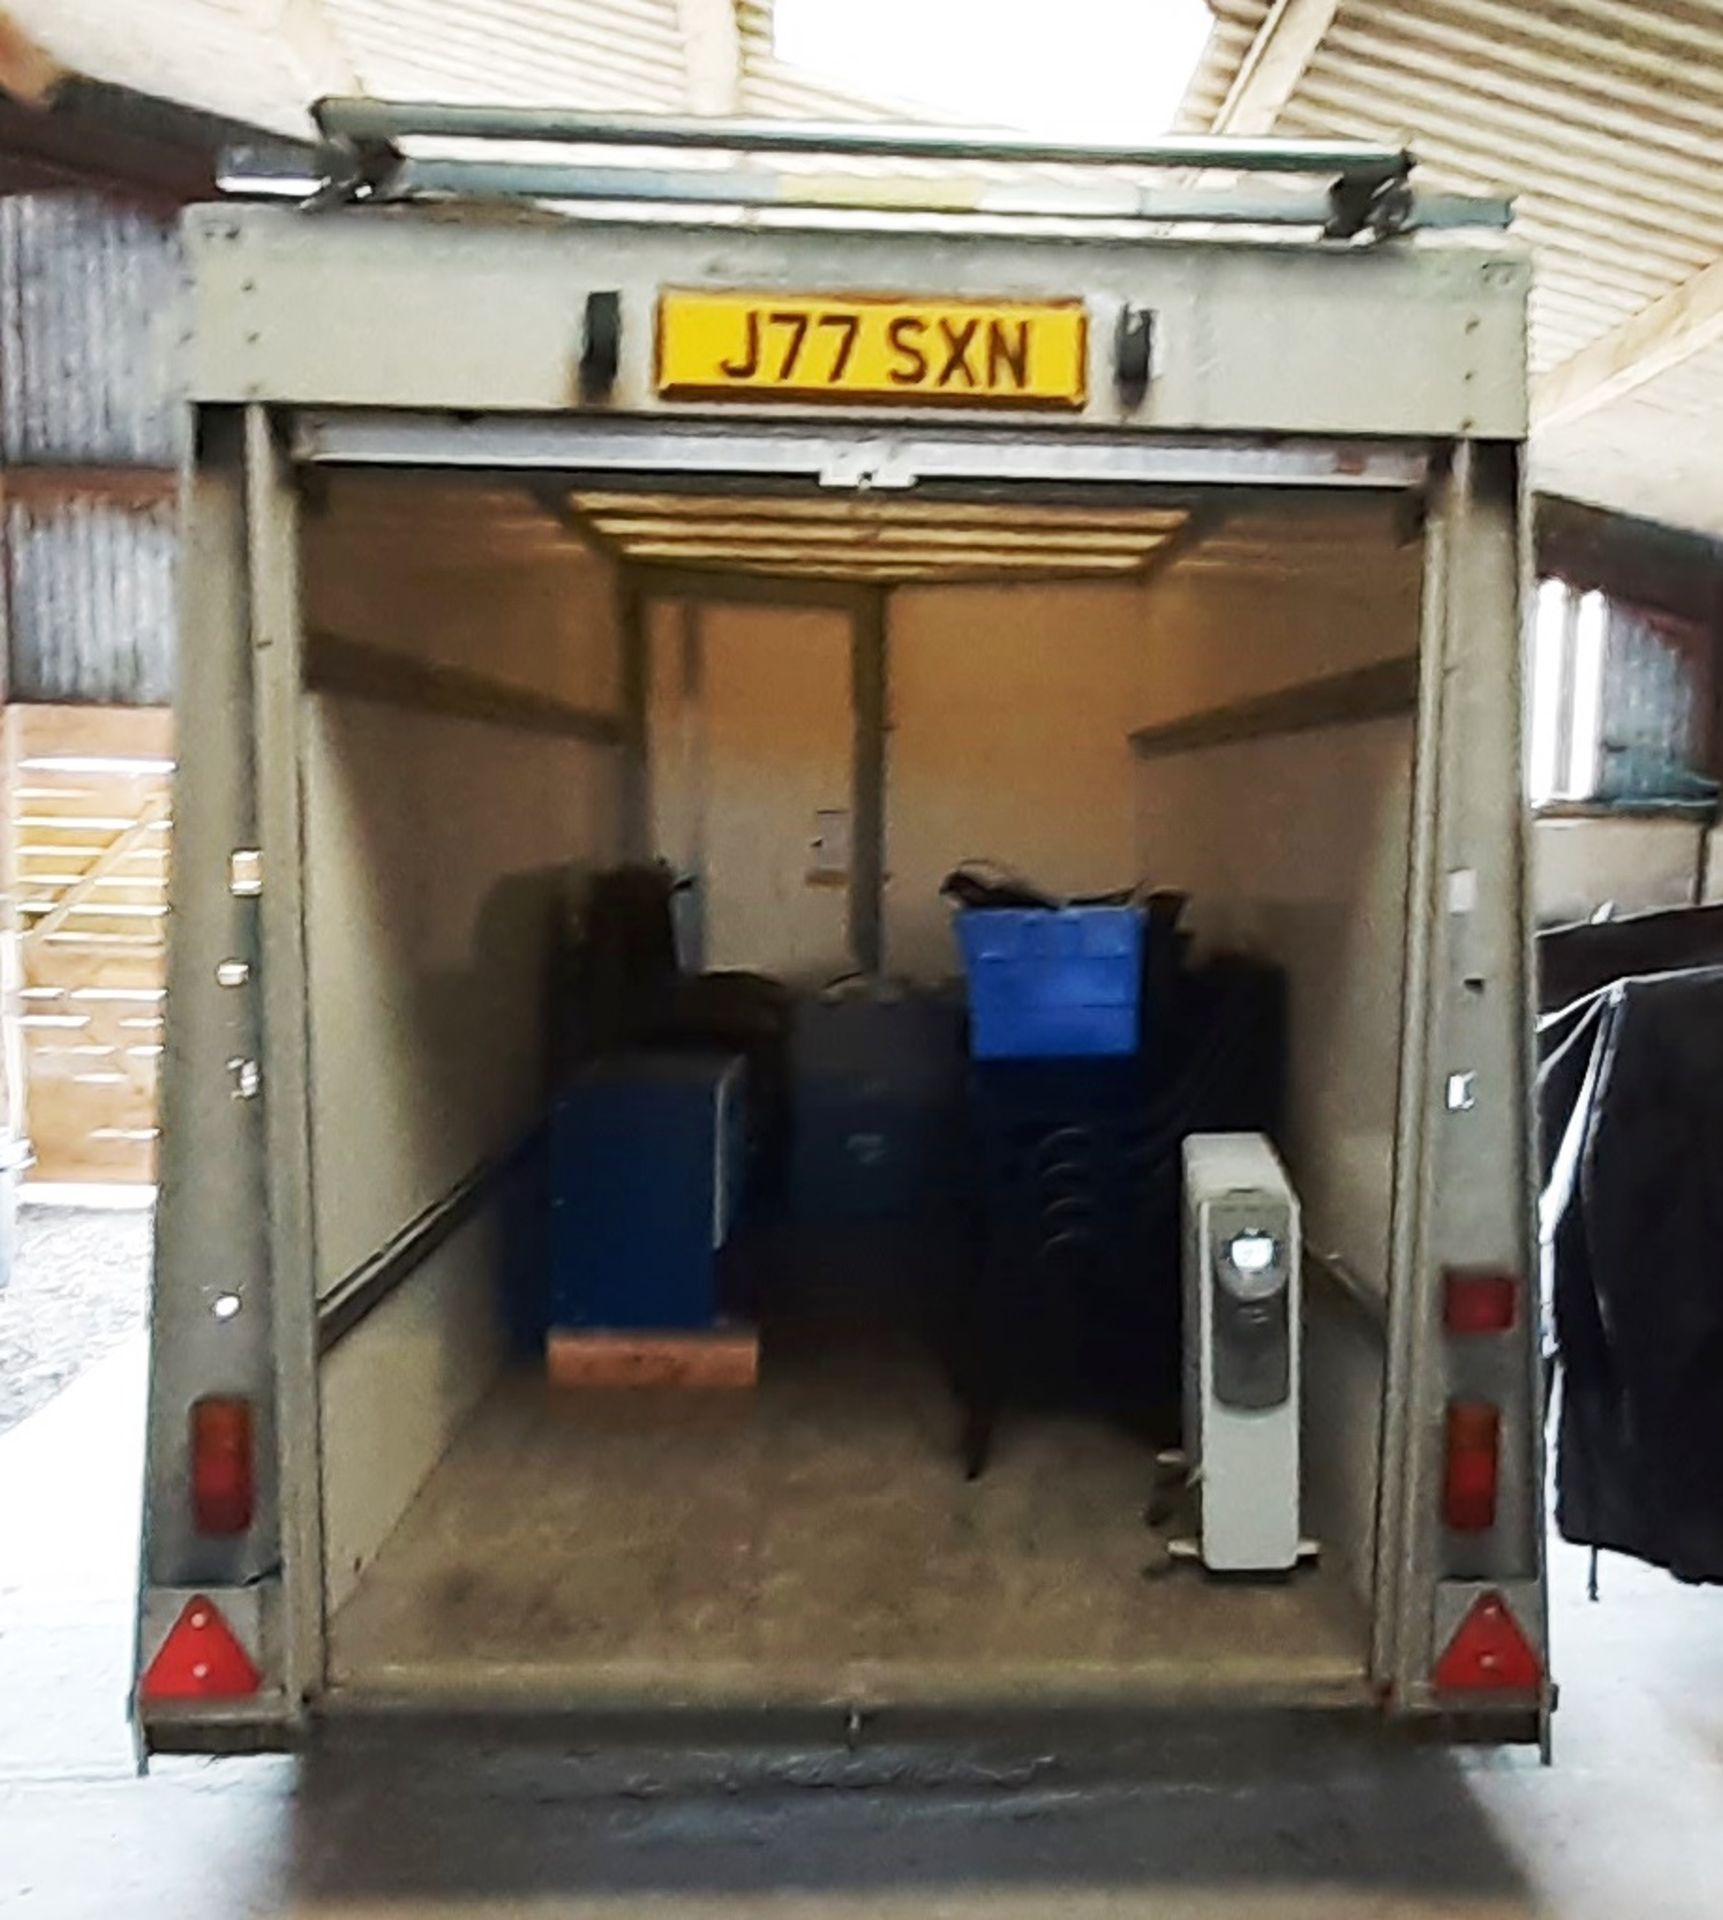 Ifor Williams 4 Wheeled Twin Axel Trailer Type BV1059, Trailer has Front Access as well as Rear - Image 5 of 12